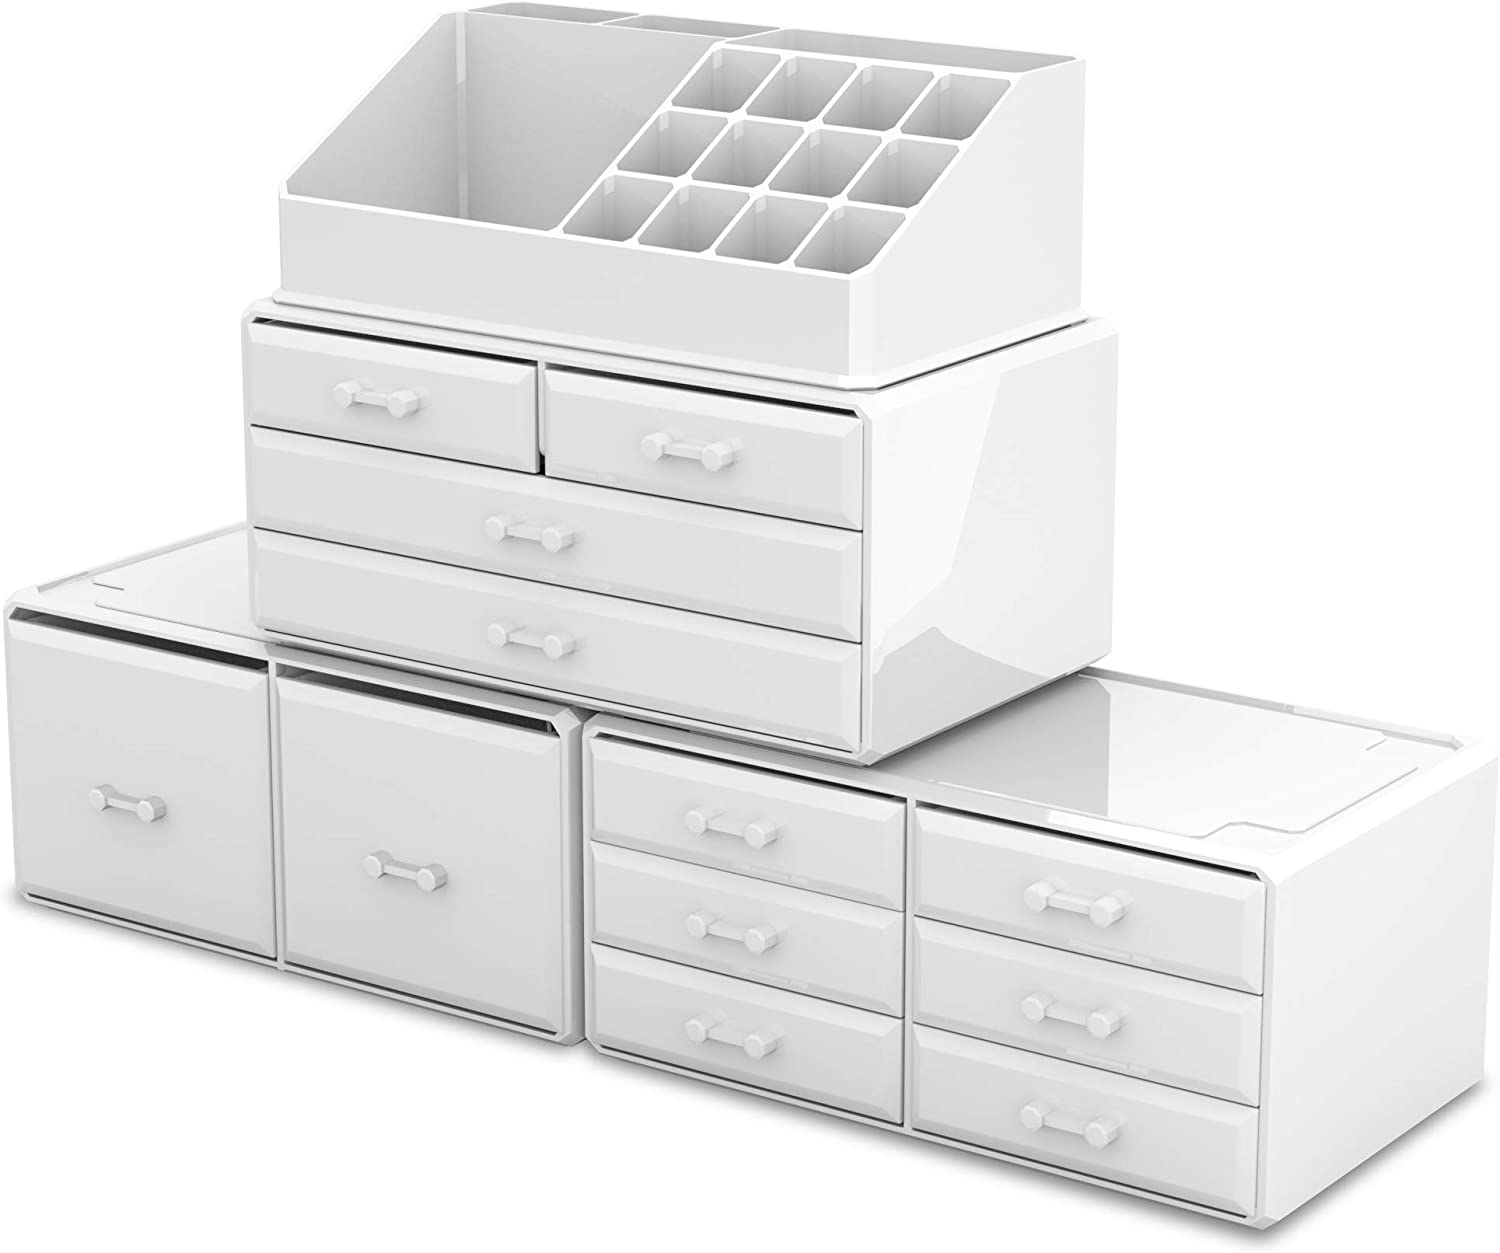 Makeup Cosmetic Organizer Storage with 12 Drawers Display Boxes (White) - SILBERSHELL